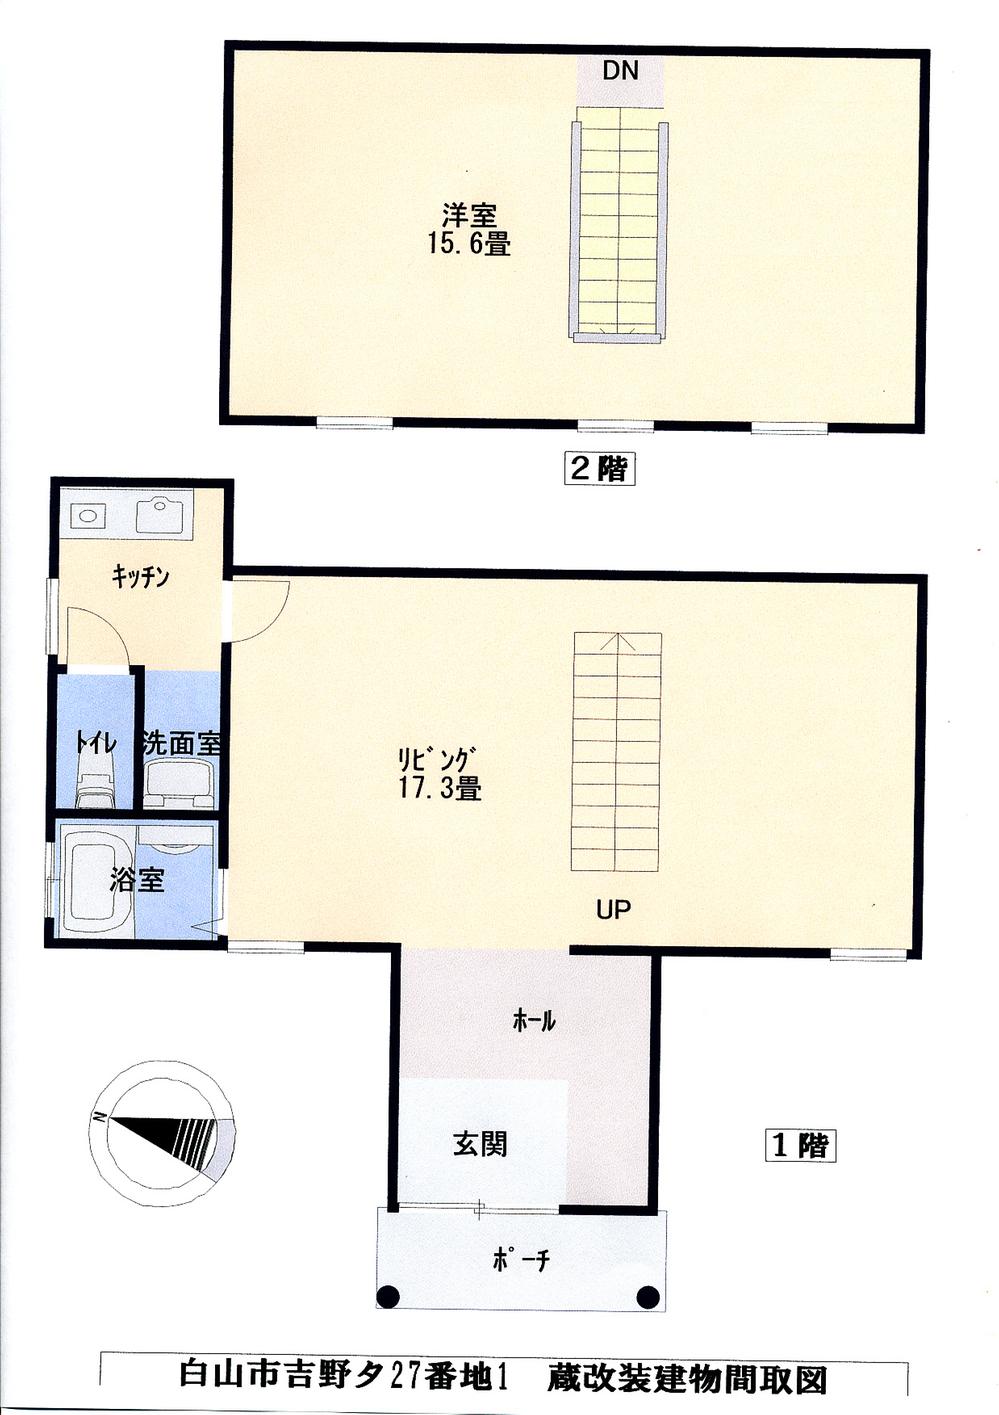 Floor plan. 3.5 million yen, 2K, Land area 79 sq m , Staircase occupies a central part in a large room in the building area 73.73 sq m 1 floor 2 Kaitomo